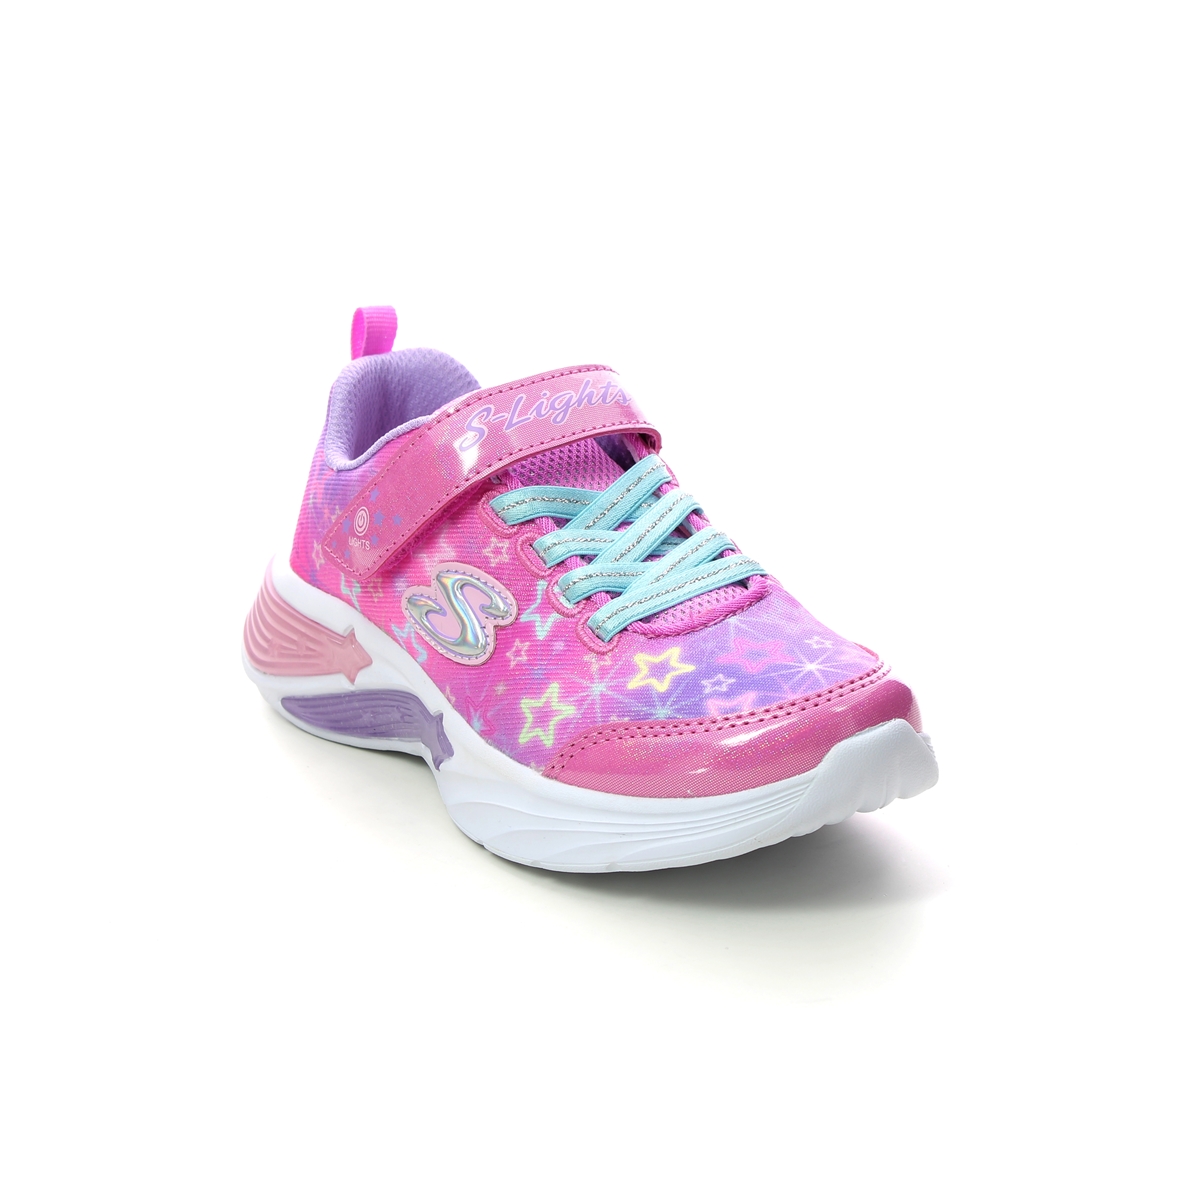 Skechers Star Sparks Pink Kids Girls Trainers 302324L In Size 31 In Plain Pink For kids